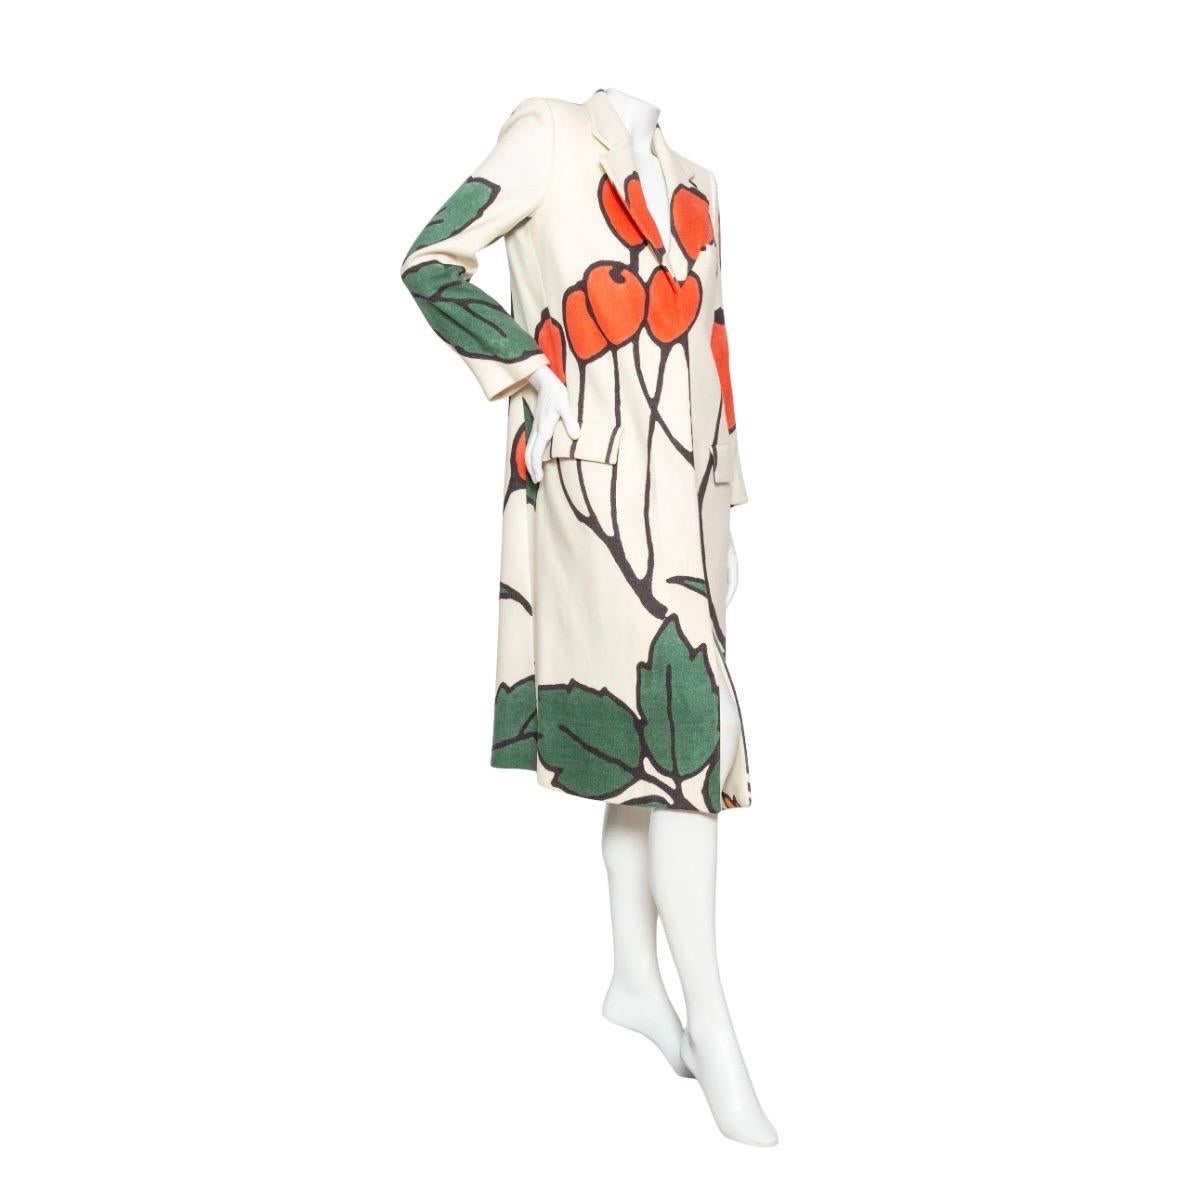 Loewe Wool Herbarium Coat

By JW Anderson
Cream/Red/Green/Black
Plant print
Single breasted
Front flap pockets
Hidden front button placket
Back vent
Long straight silhouette
Made in Italy
100% wool; 53% viscose, 47% cupro lining
Excellent pre-owned